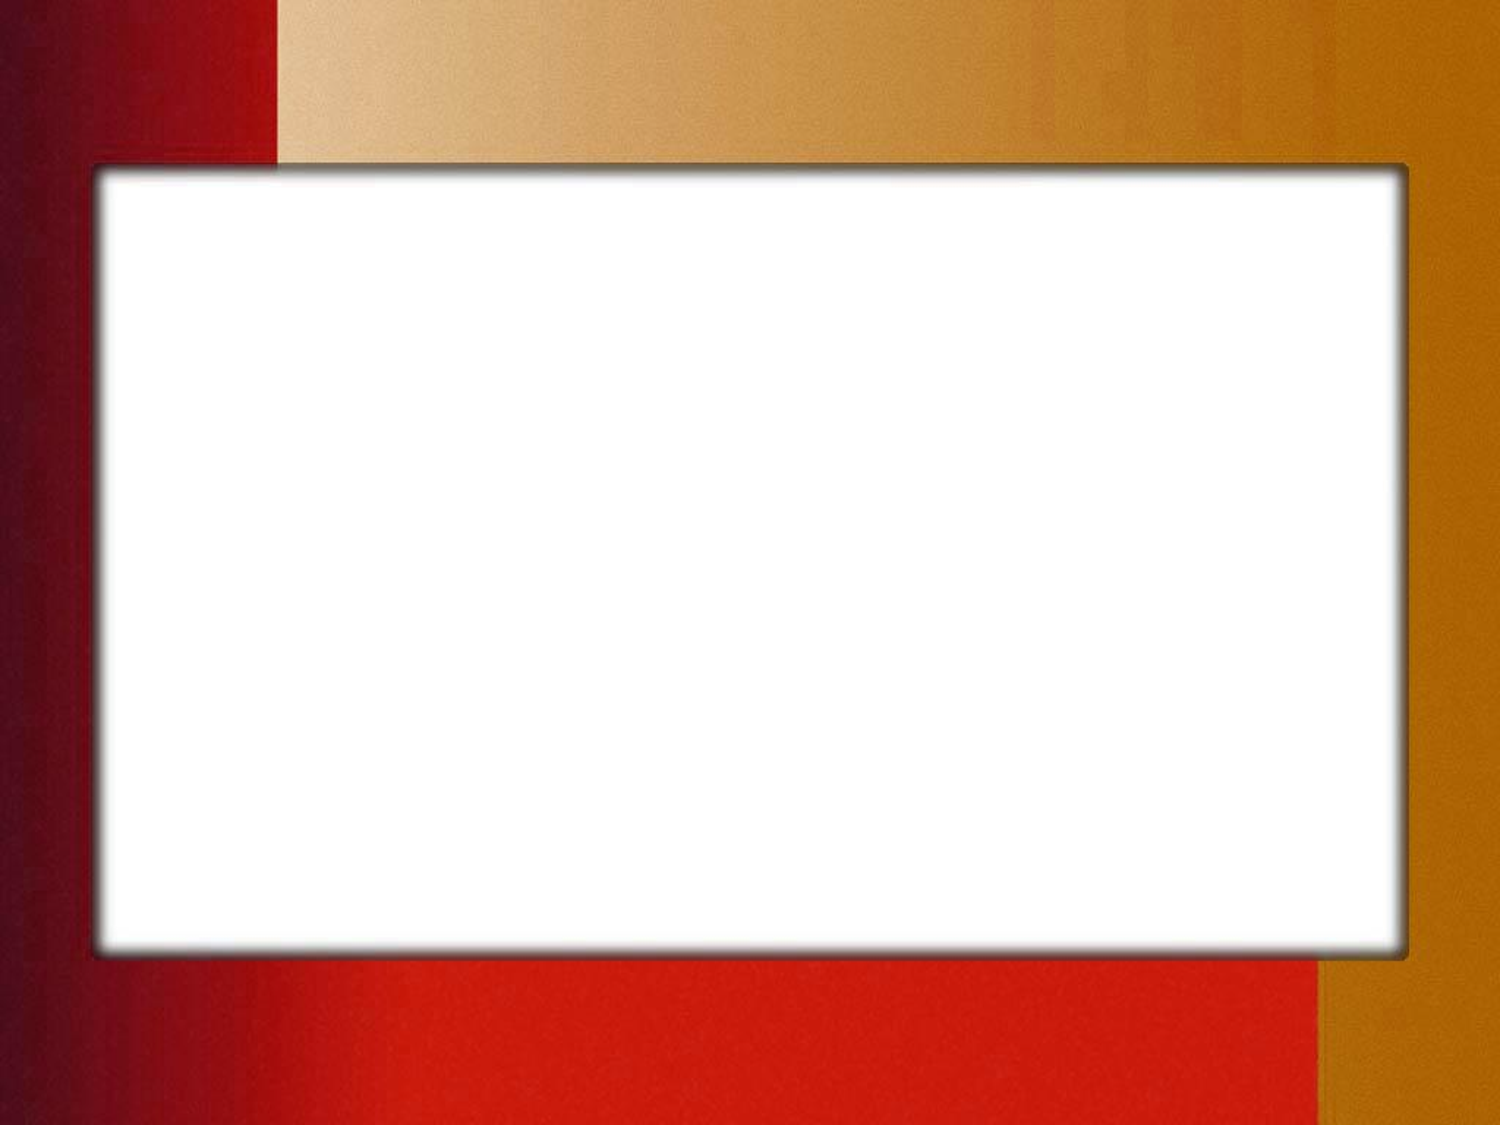 Two Tone Frame Red Powerpoint Background Template By Misspowerpoint